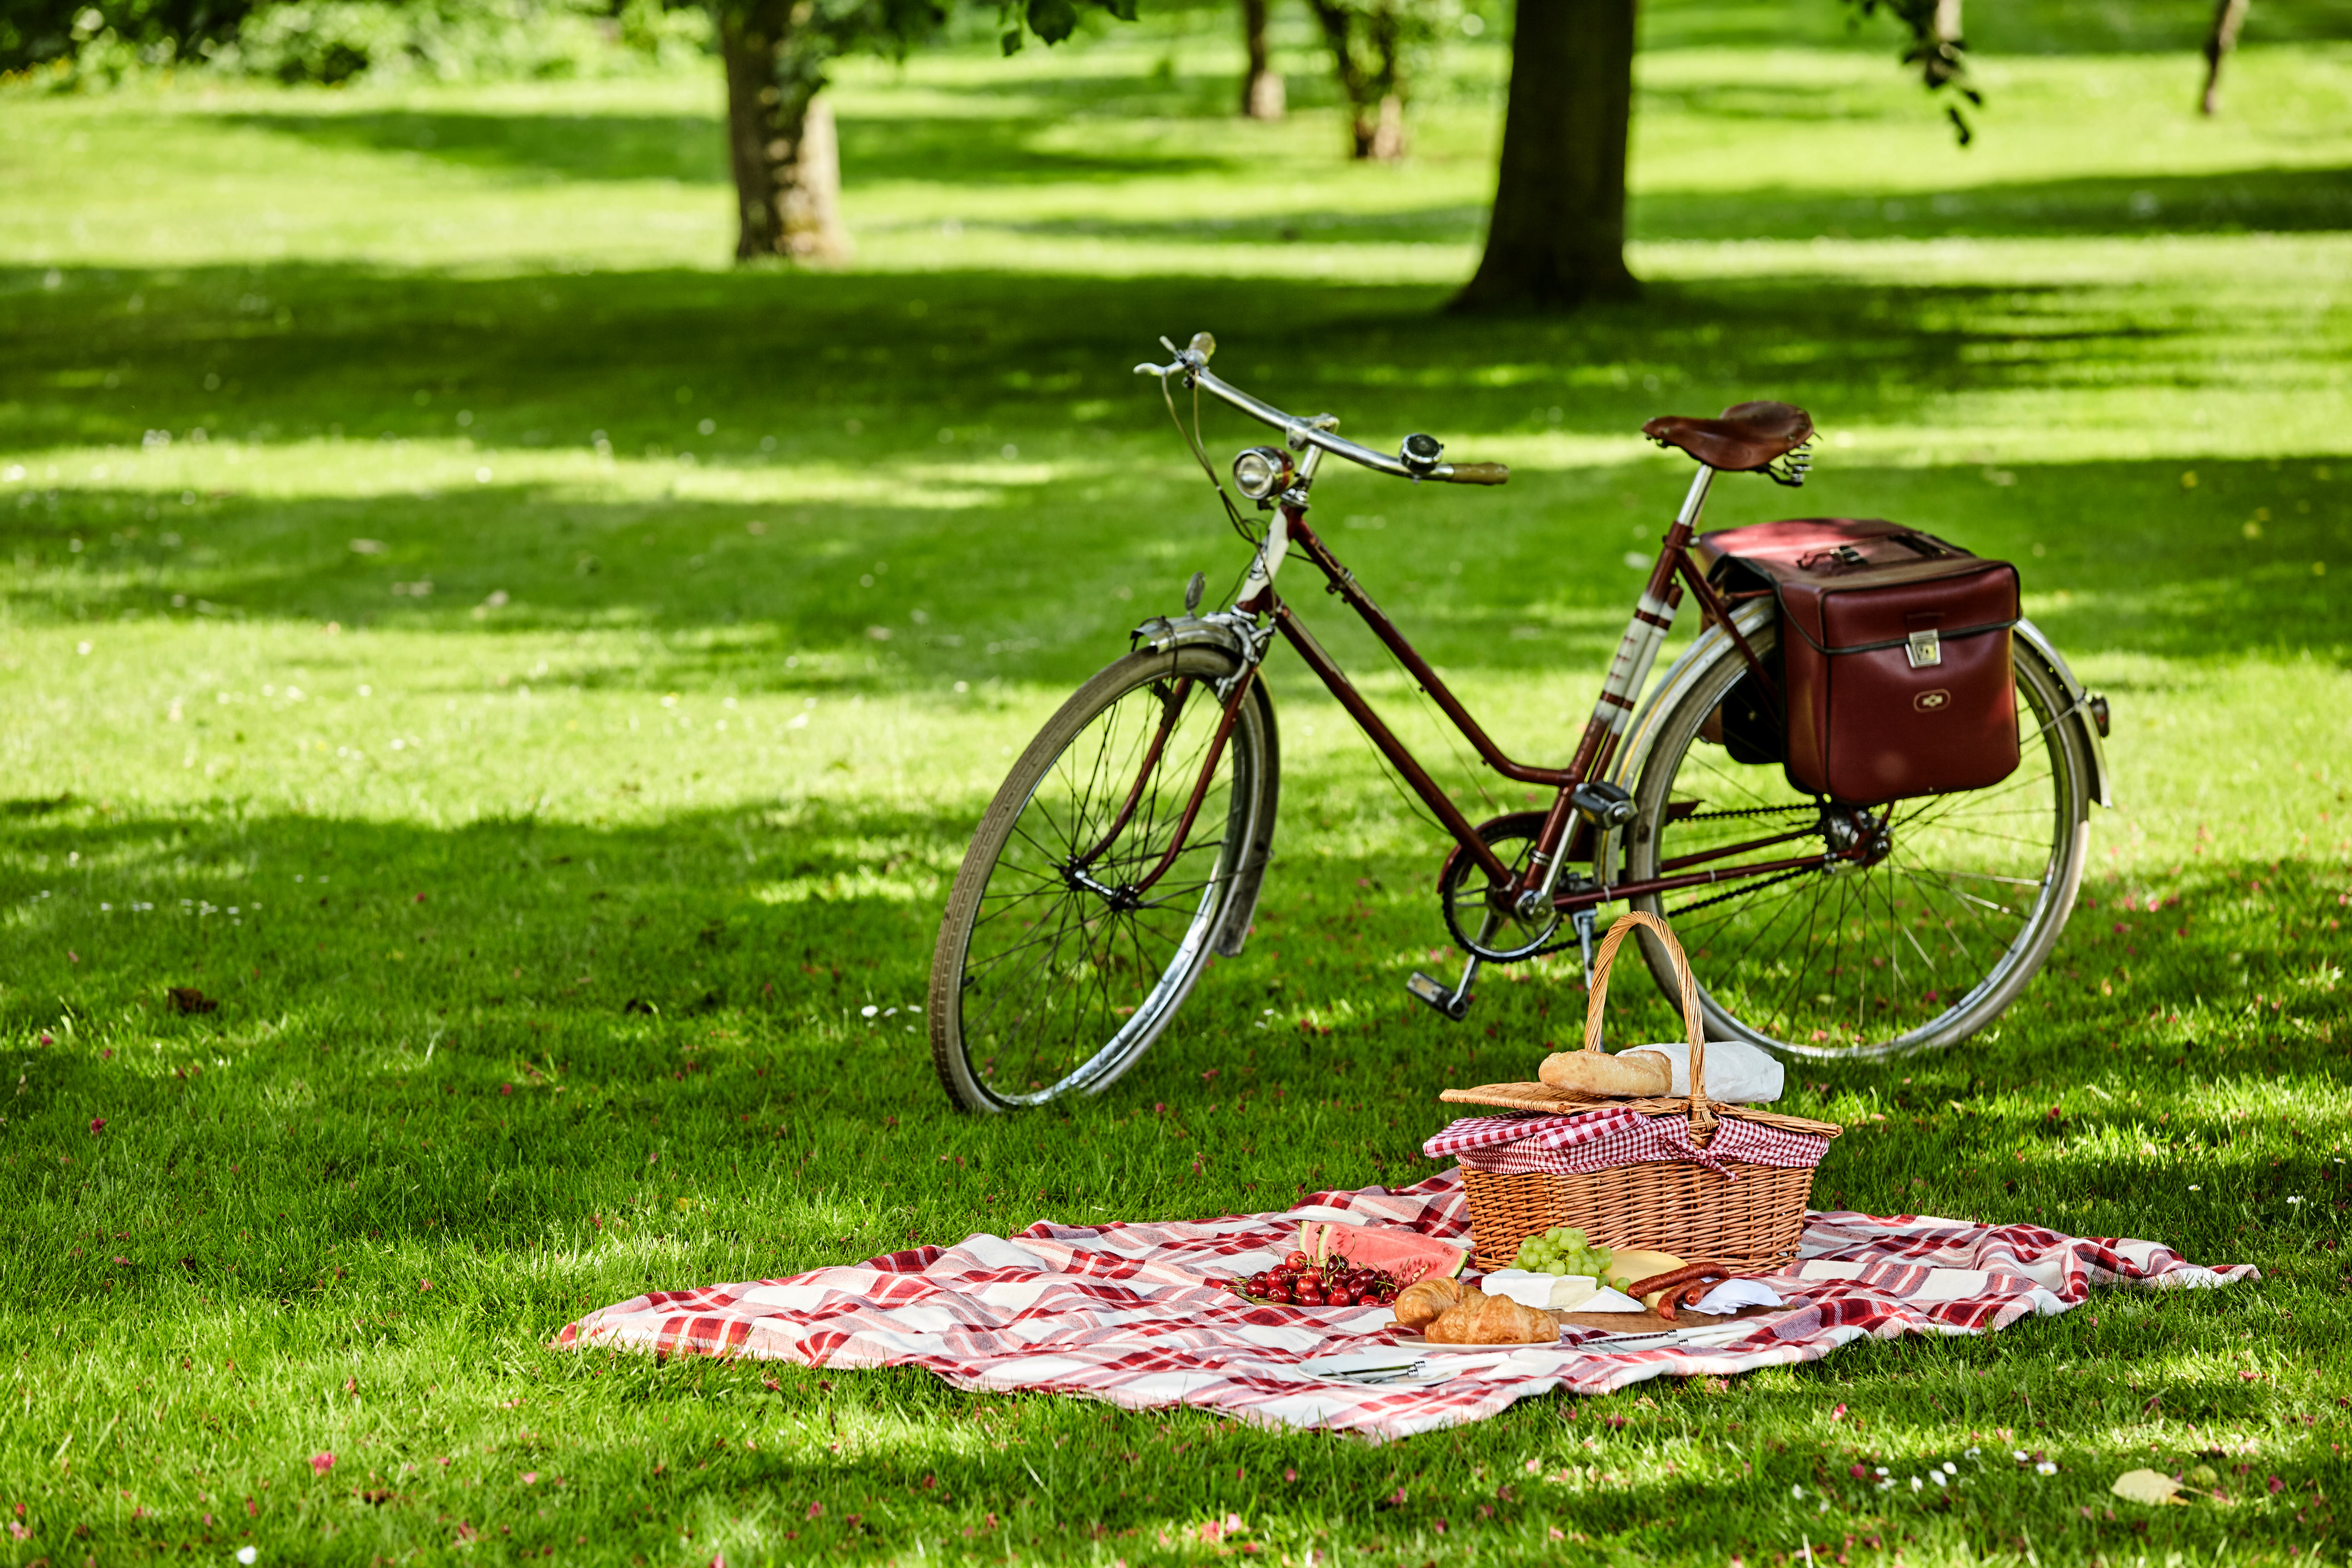 Bicycle with saddlebags and picnic hamper with fresh fruit, cheese, sausages and bread spread out on green grass in a lush green park